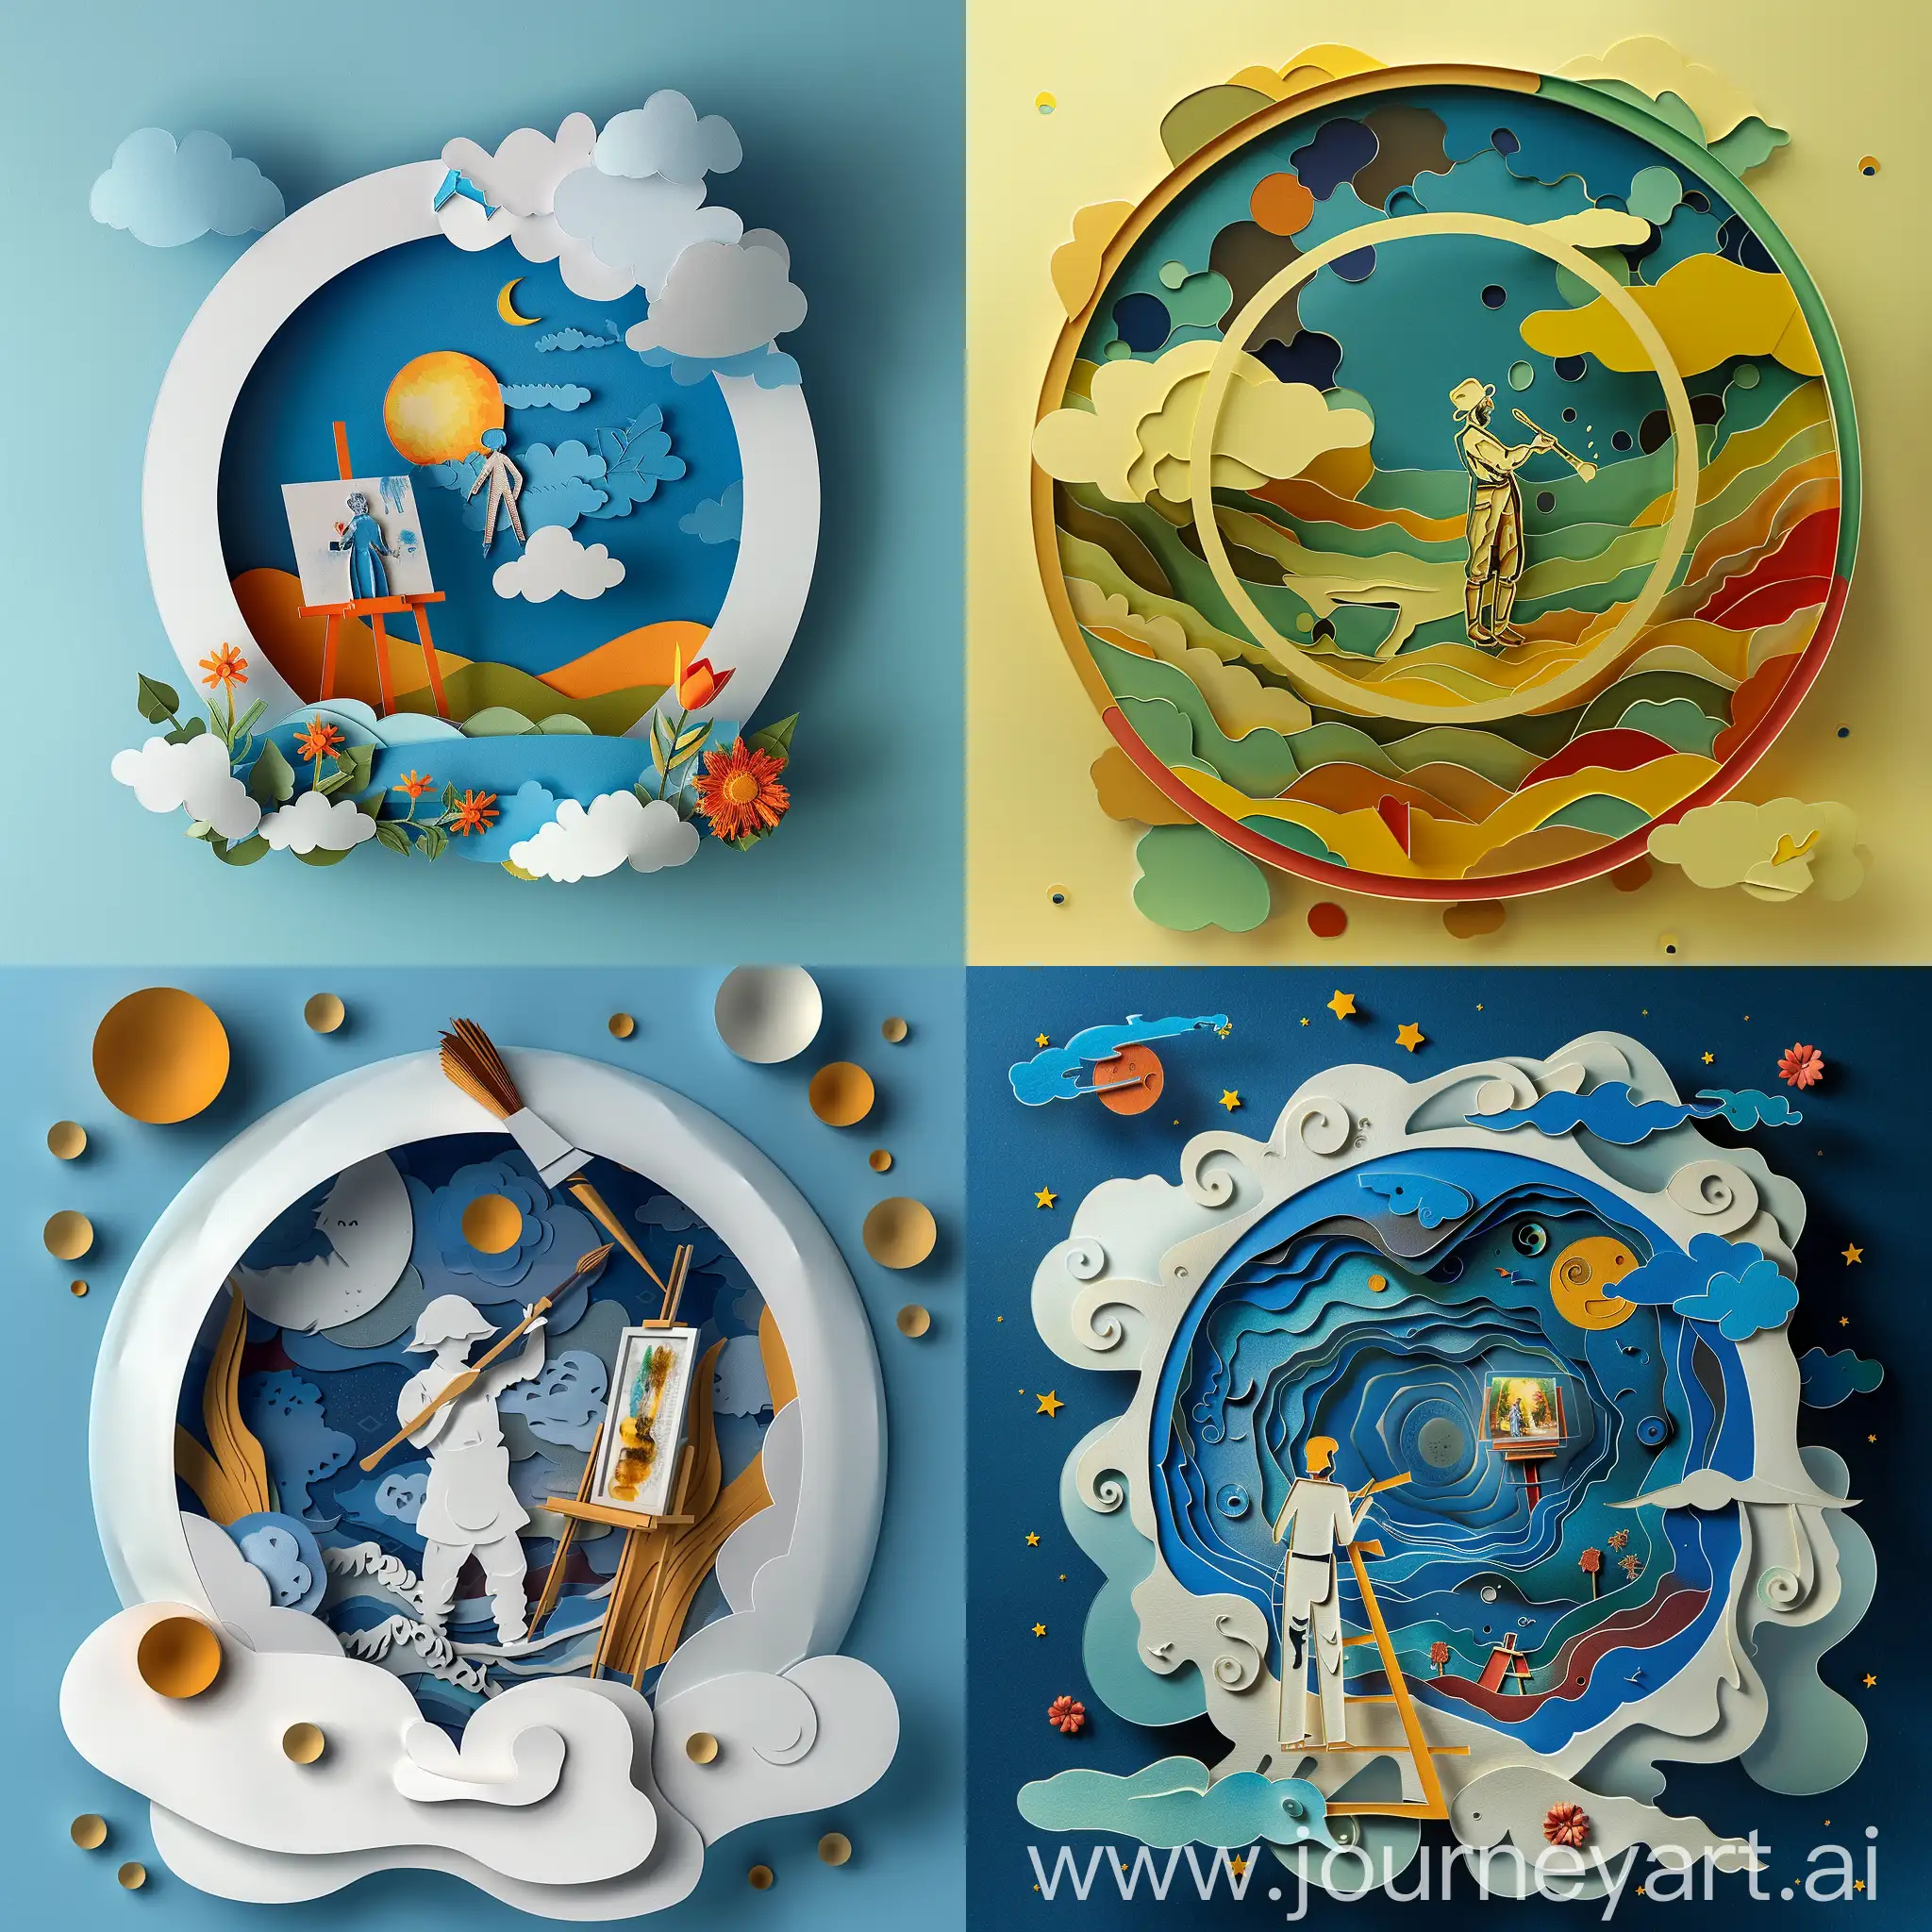 Create 3D papercut art featuring a dream bubble with a painter in it